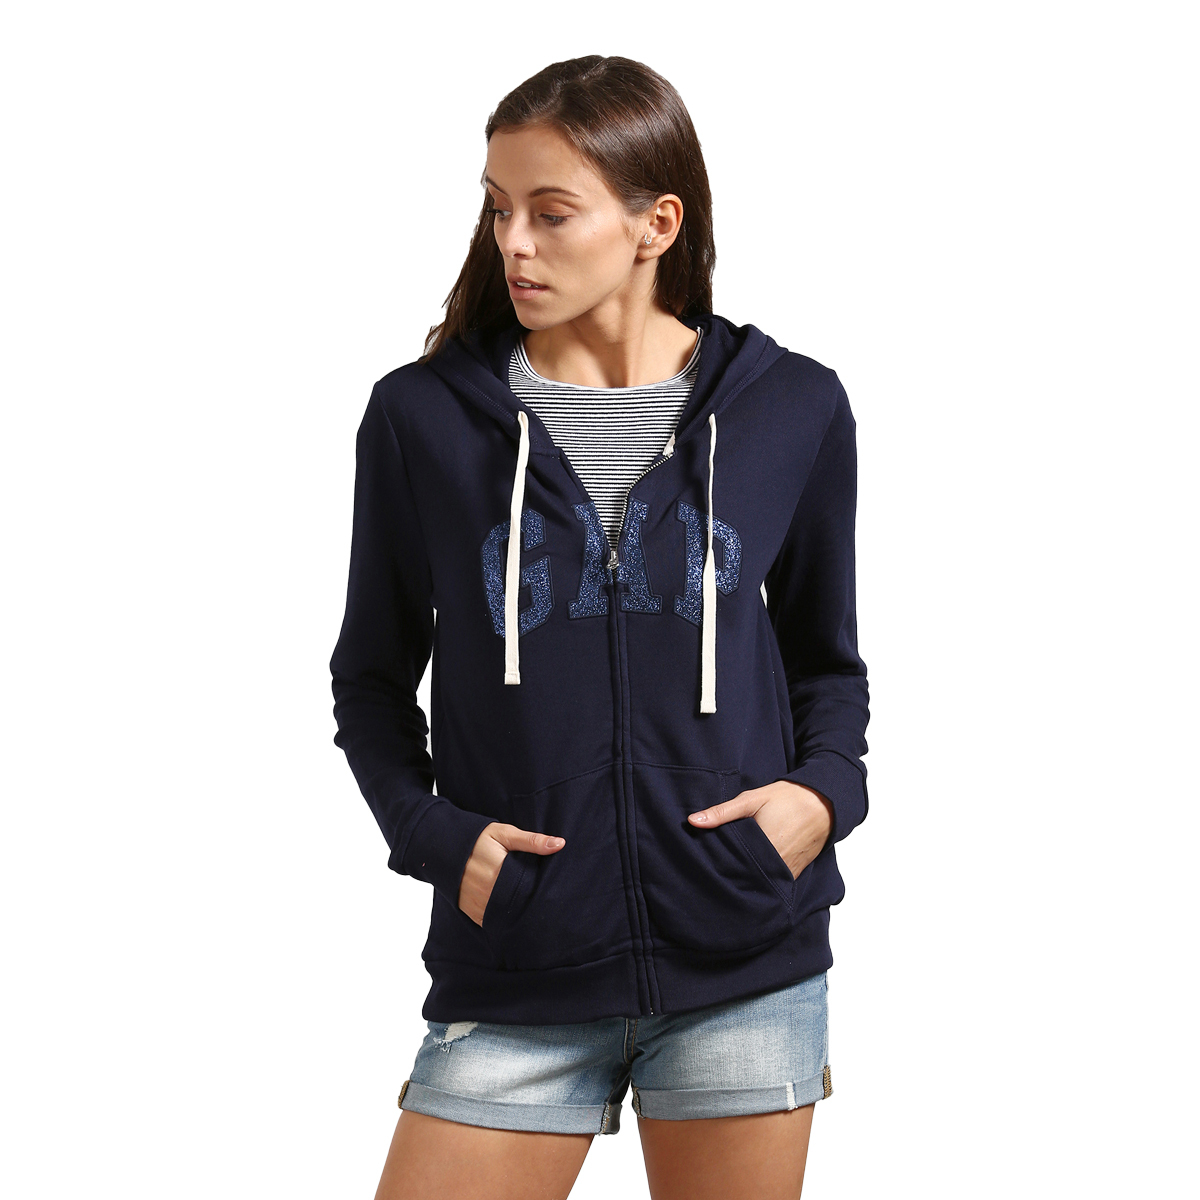 Gap Solid Color Hoodie Sweat Shirt with Two Front Pockets & Glitter Applique Logo - Navy